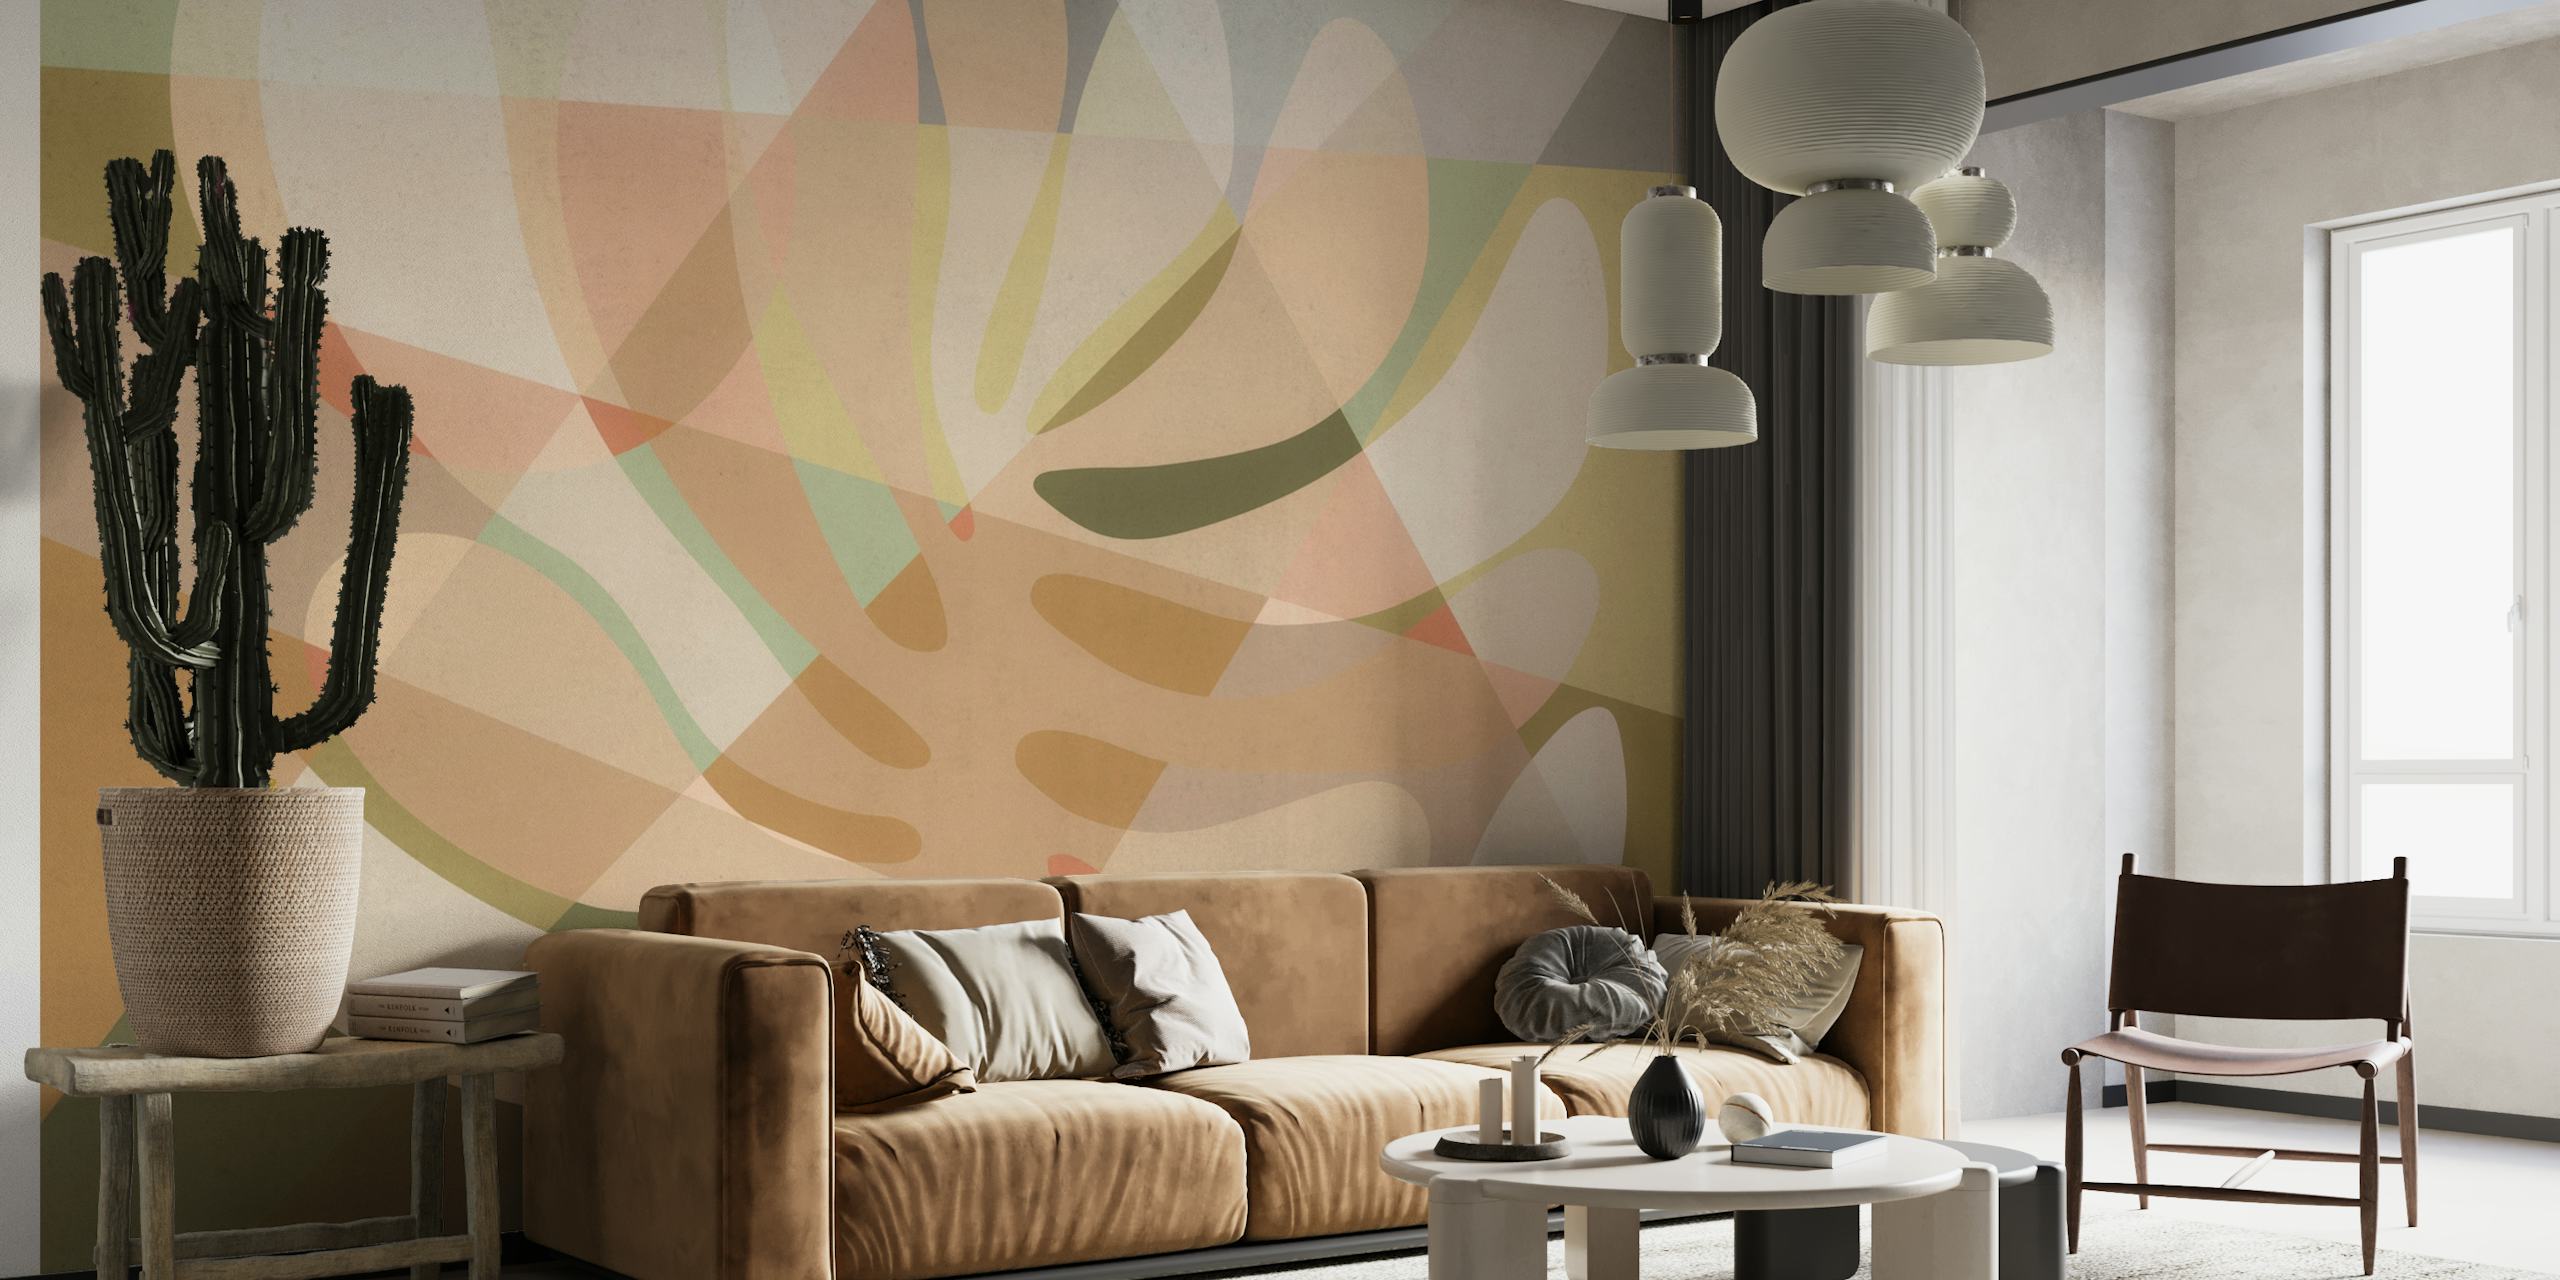 Abstract tree wall mural in warm shades of beige, tan, and cream